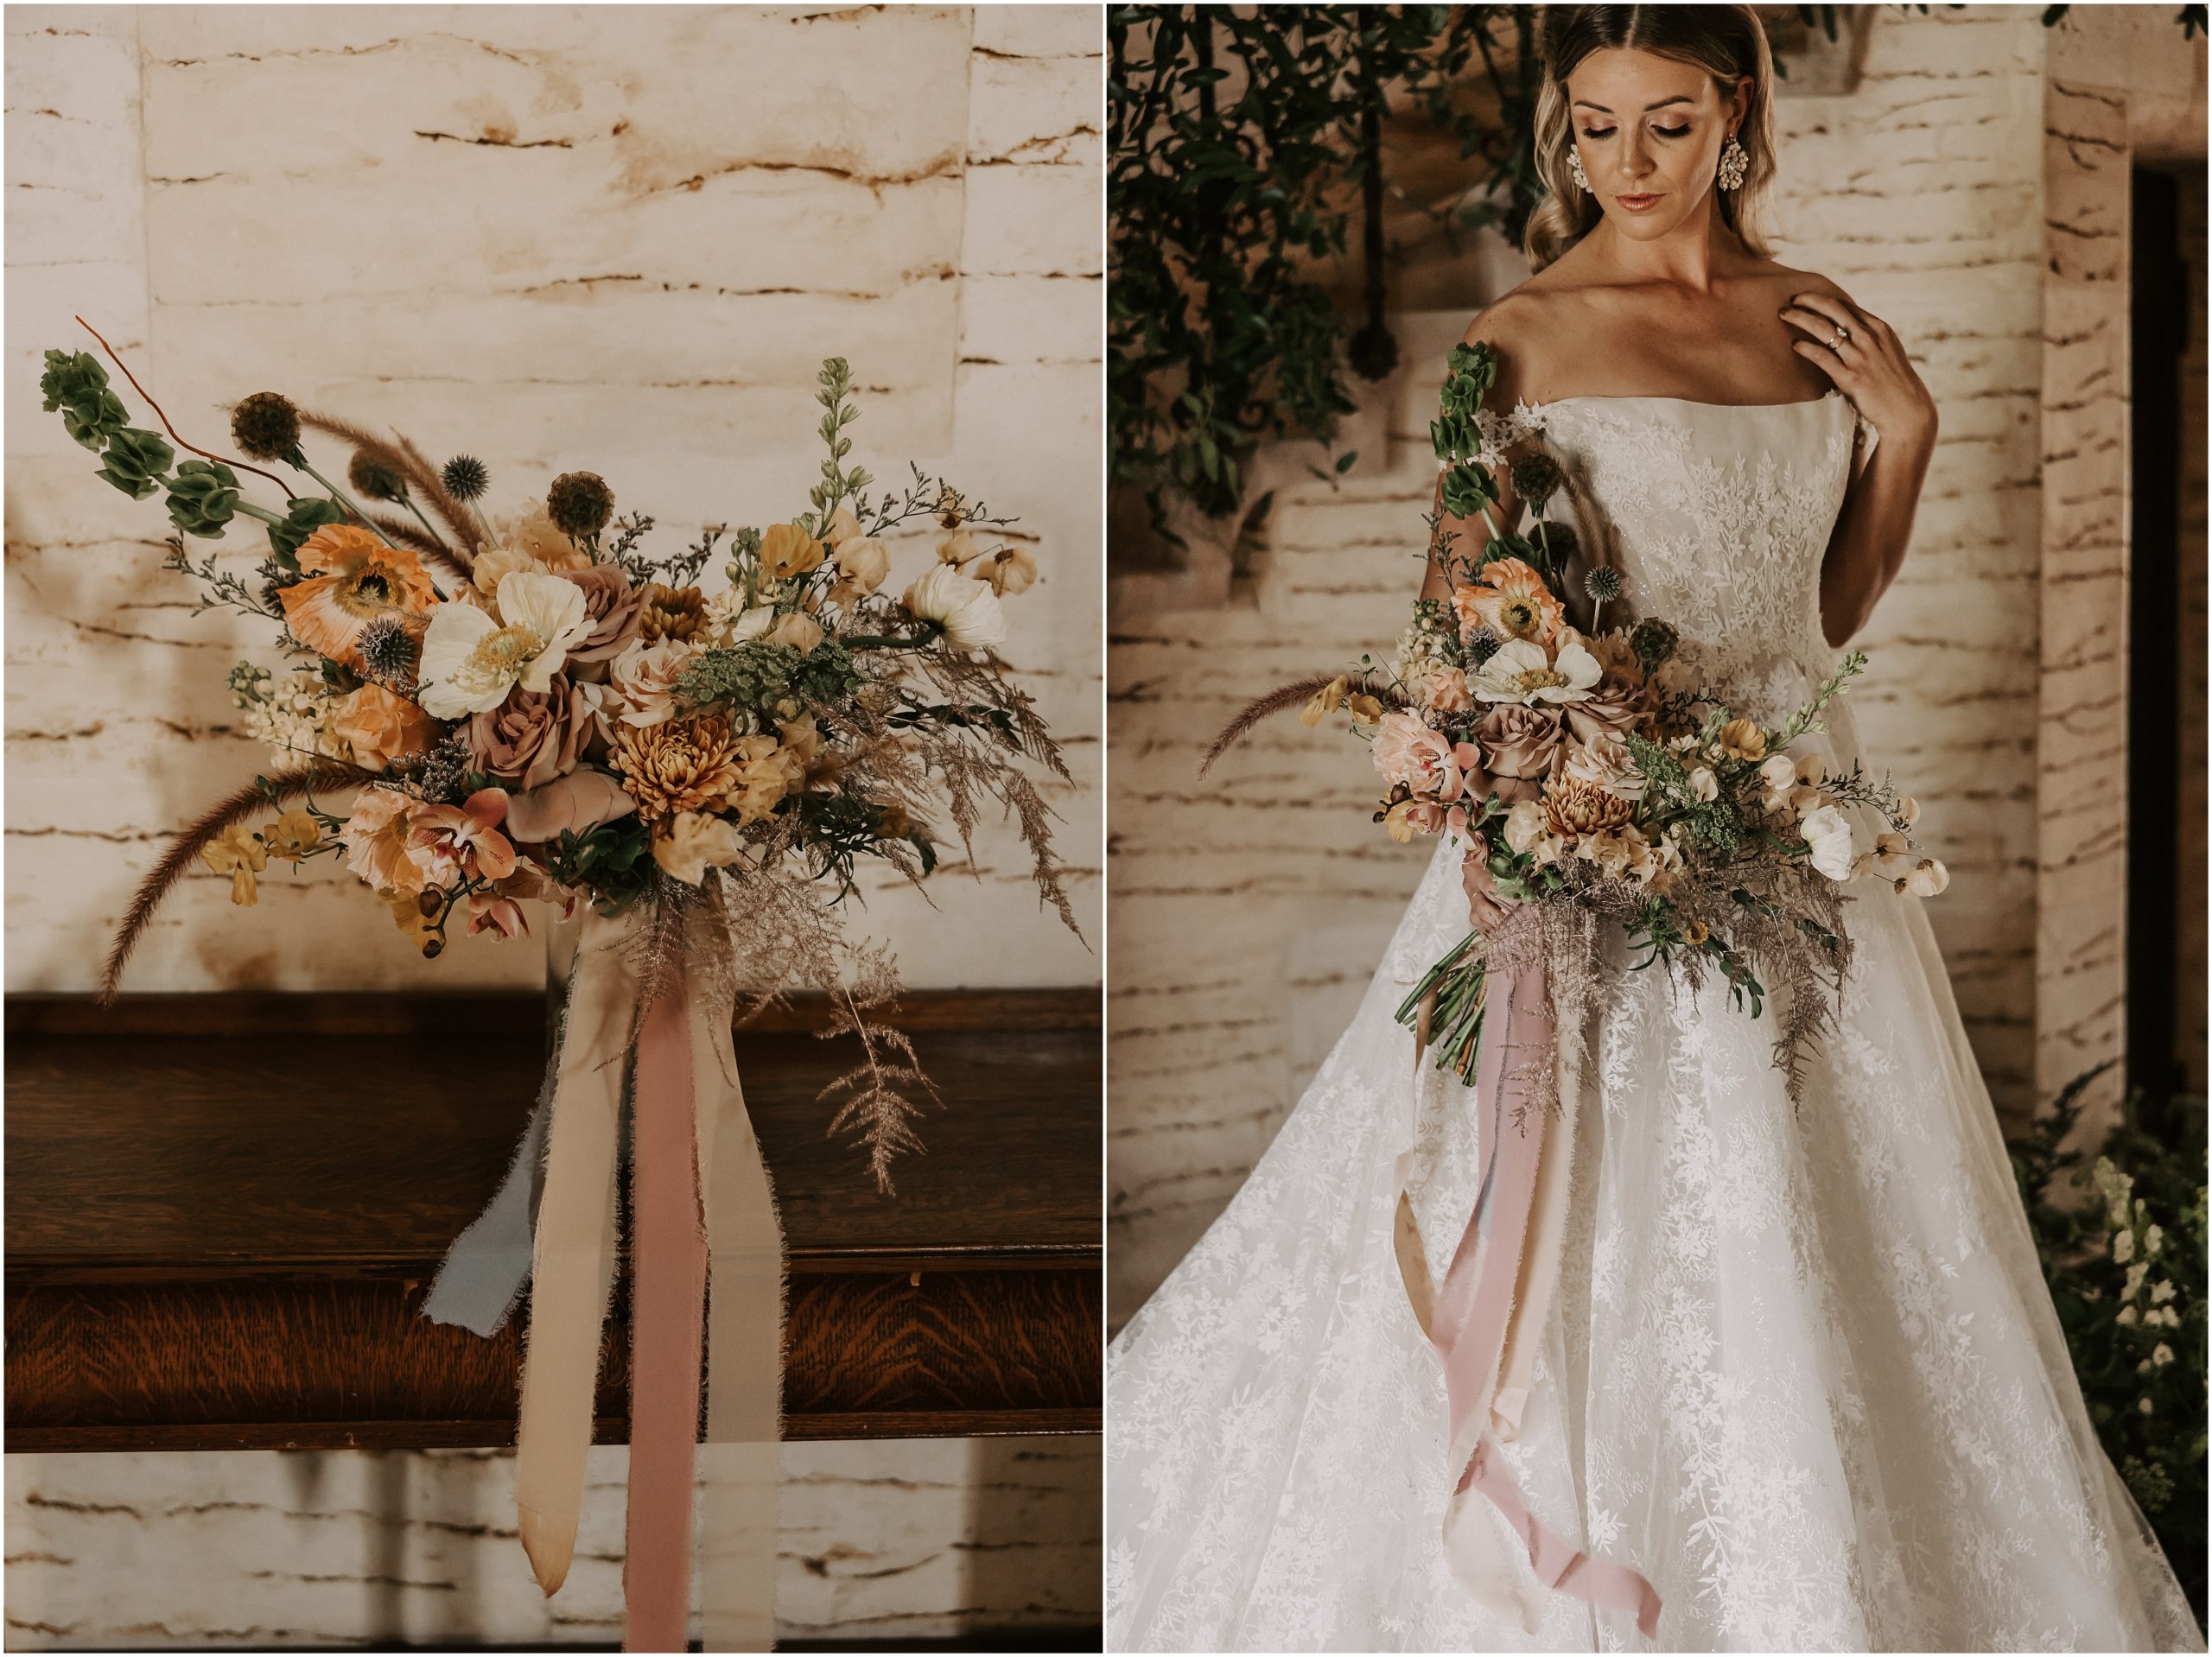 The bridal bouquet reflected perfectly our "muted rainbow" with the use of mixed greenery, orchids and roses perfecting the bridal gown with delicate lace detailing.